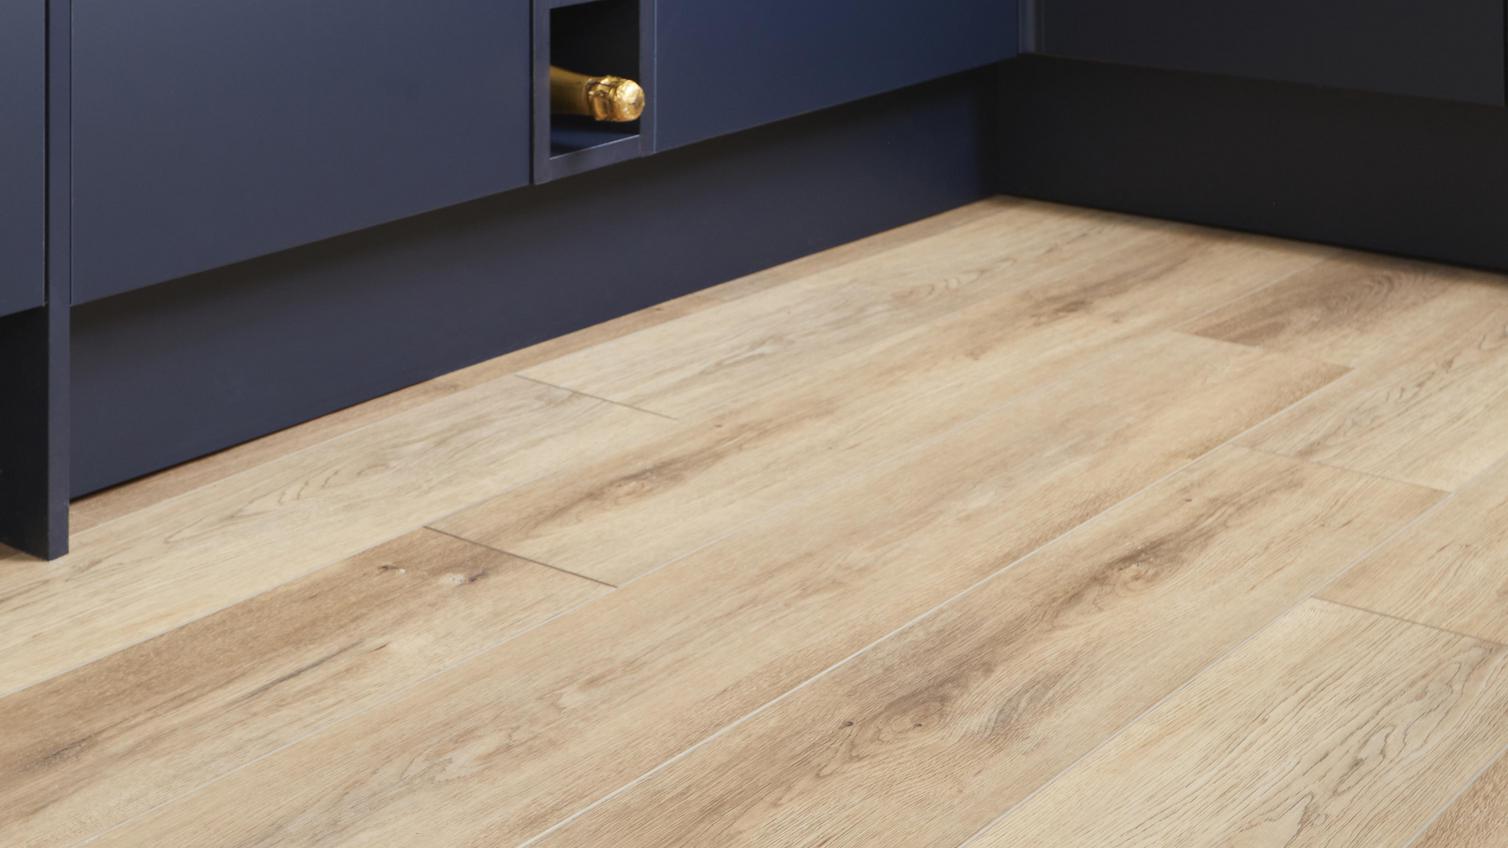 Oake & Gray branded vinyl flooring, with a light oak-effect finish. Fitted alongside navy cabinet door fronts.